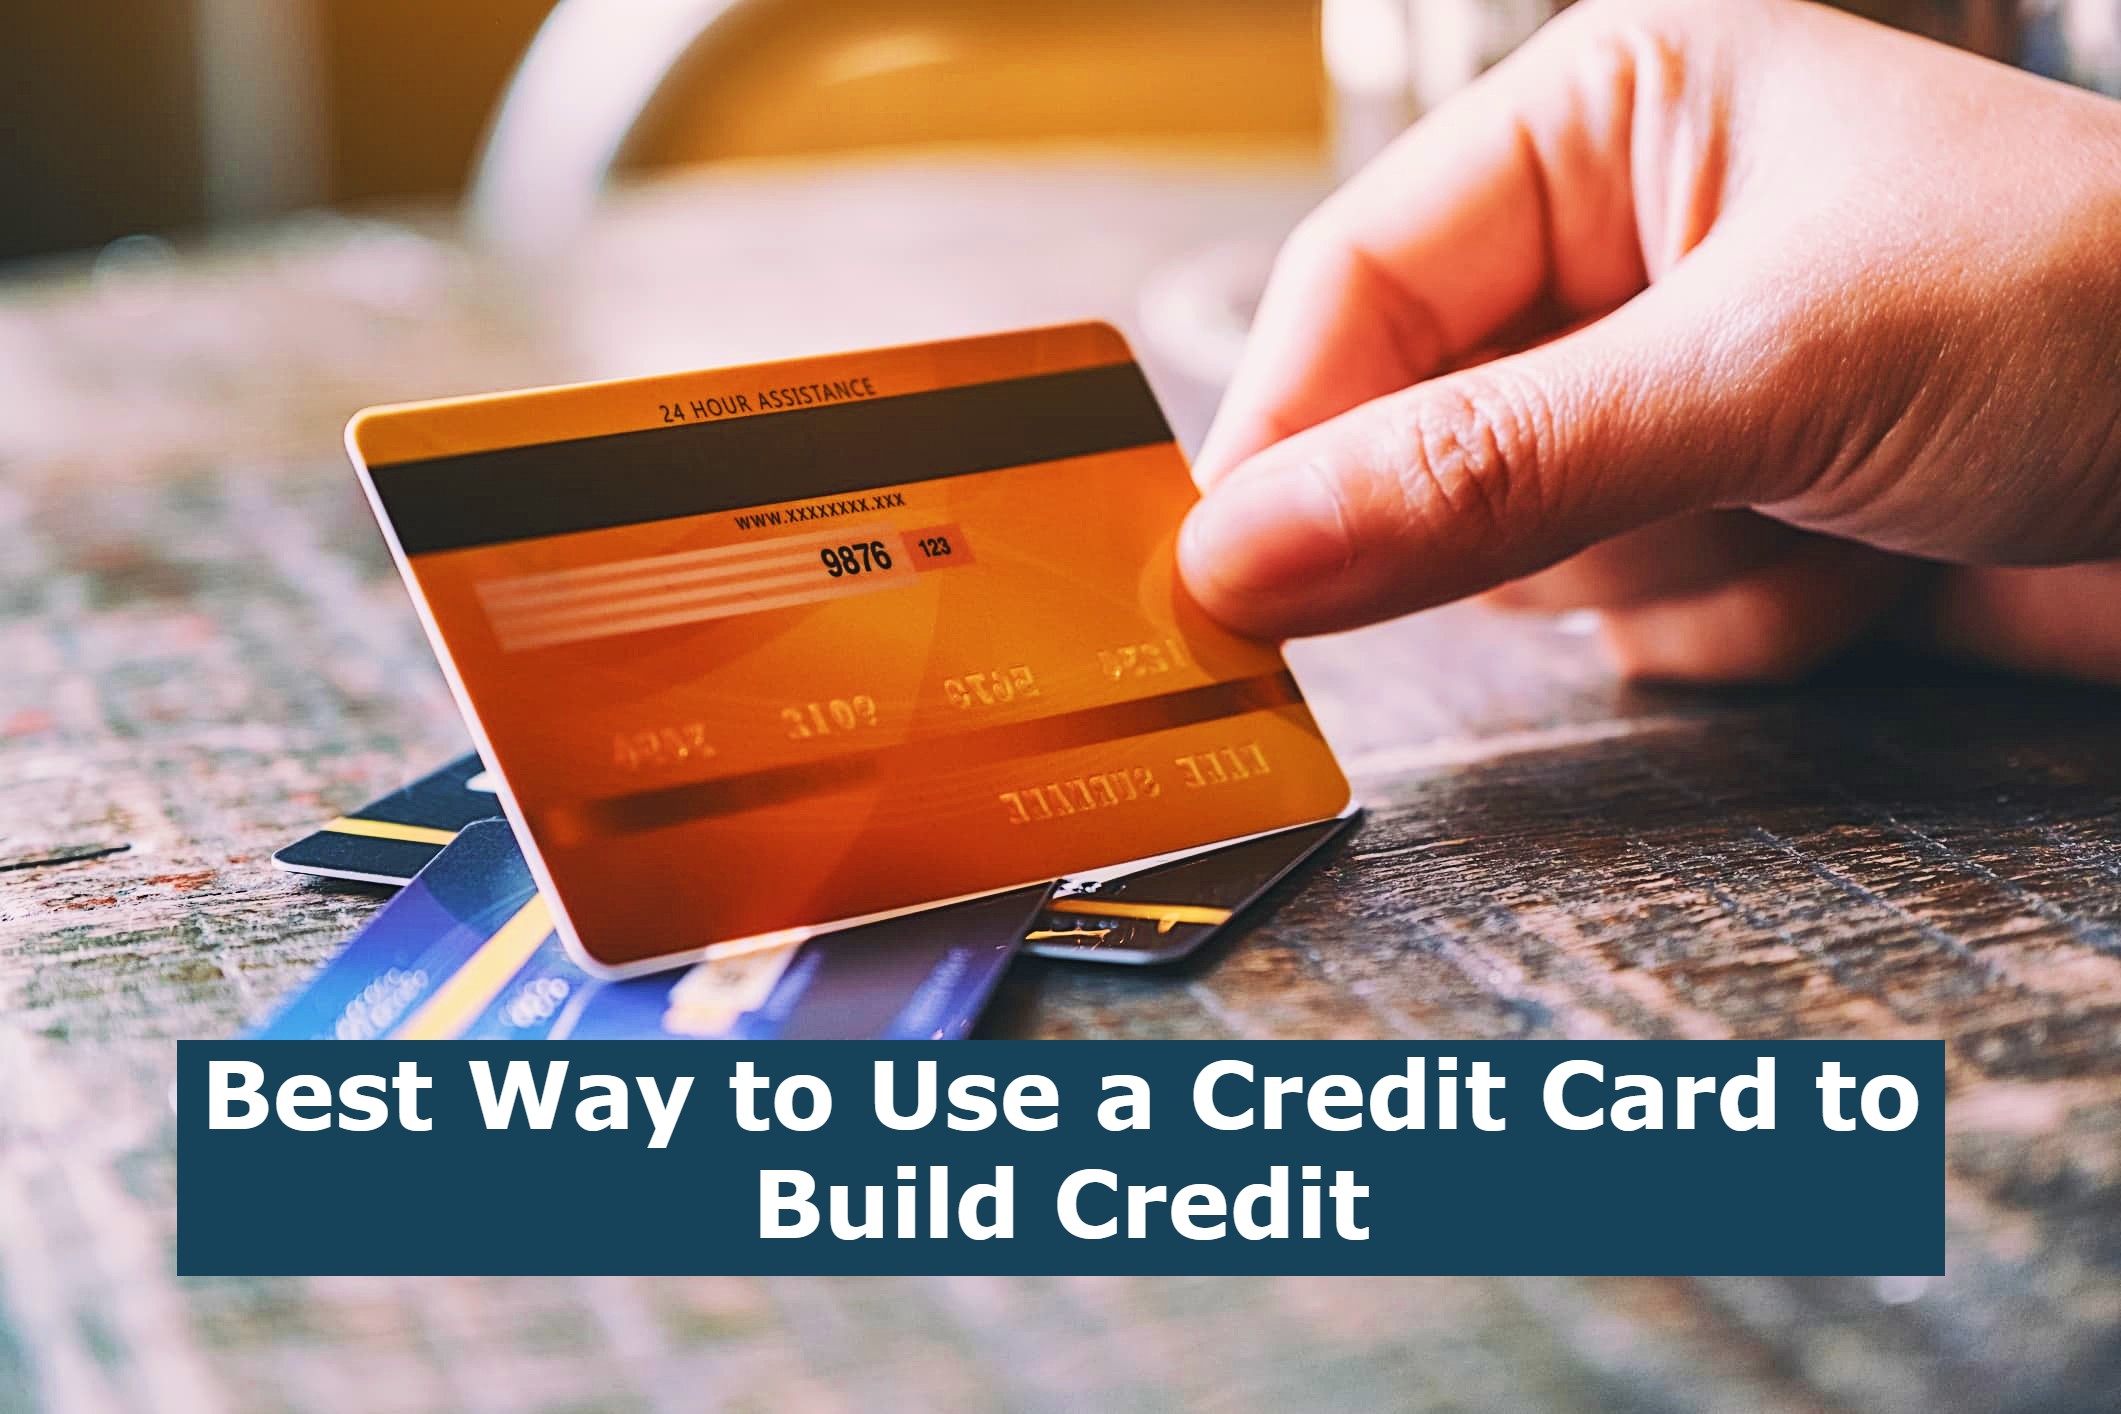 Best Way to Use a Credit Card to Build Credit